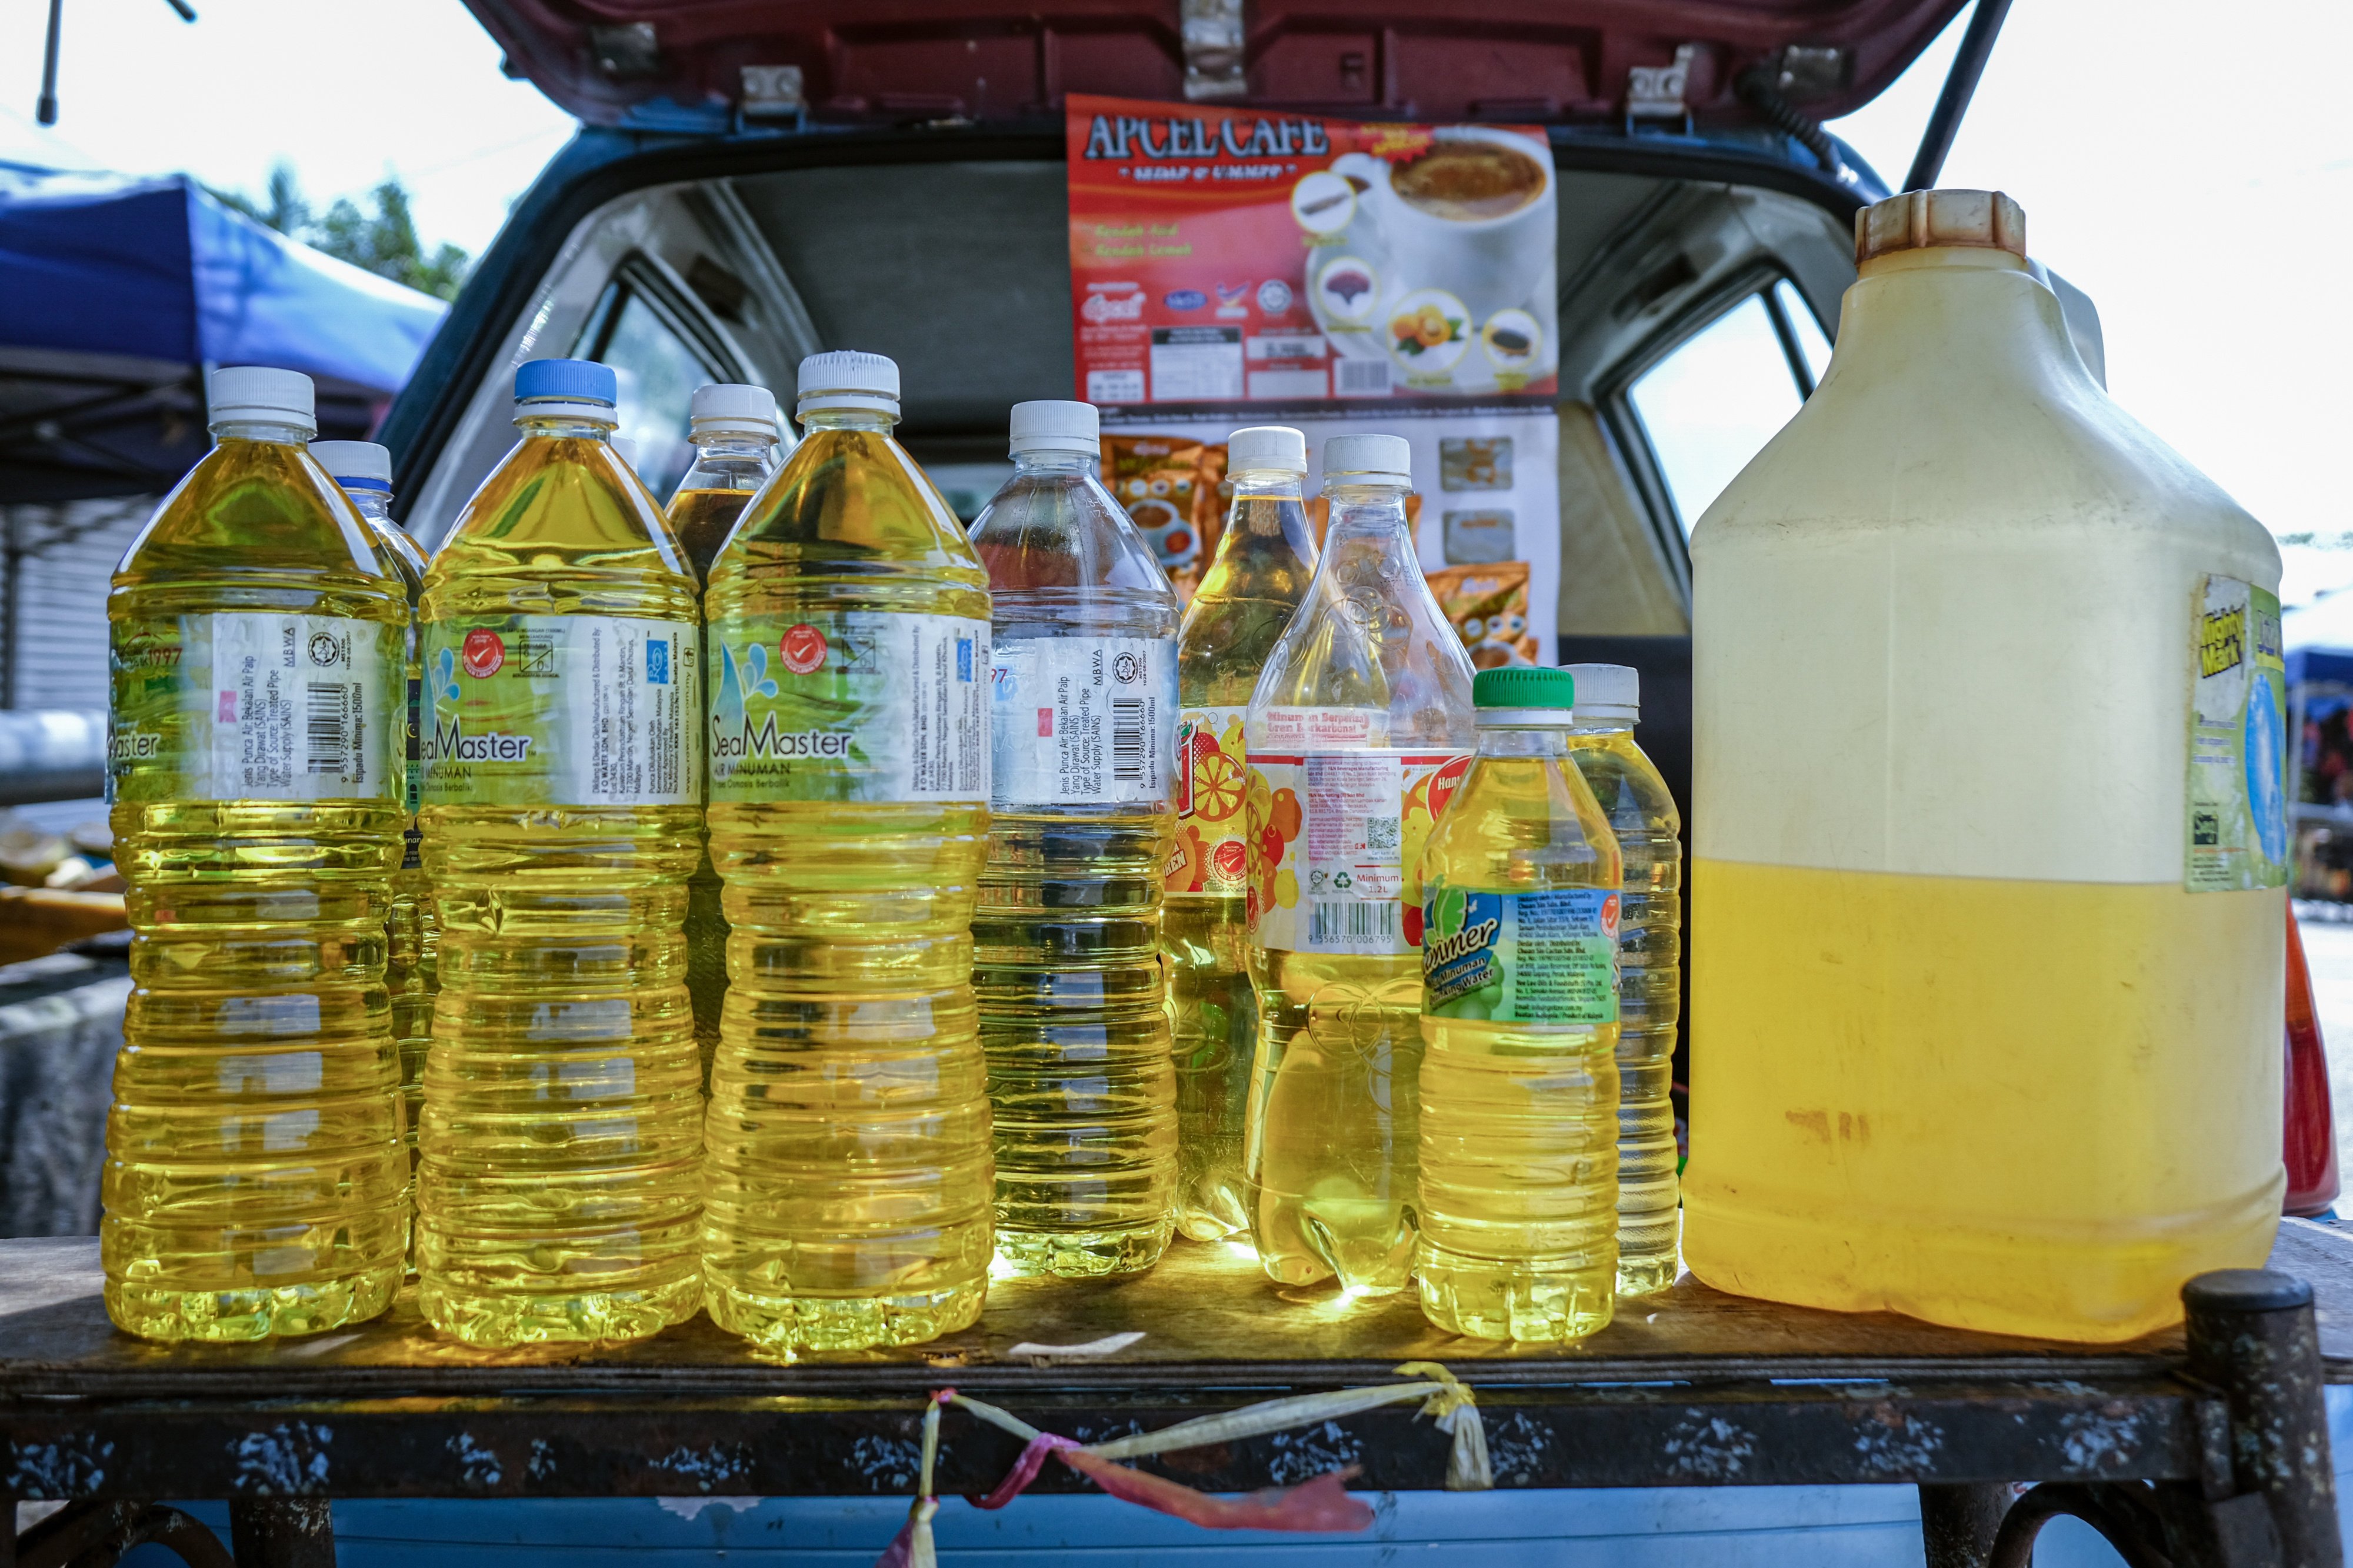 RON-95 petrol for sale at a roadside stall in a village in Klang, Selangor. Malaysia is aiming to implement a targeted subsidy scheme to help those in need. Photo: Bloomberg